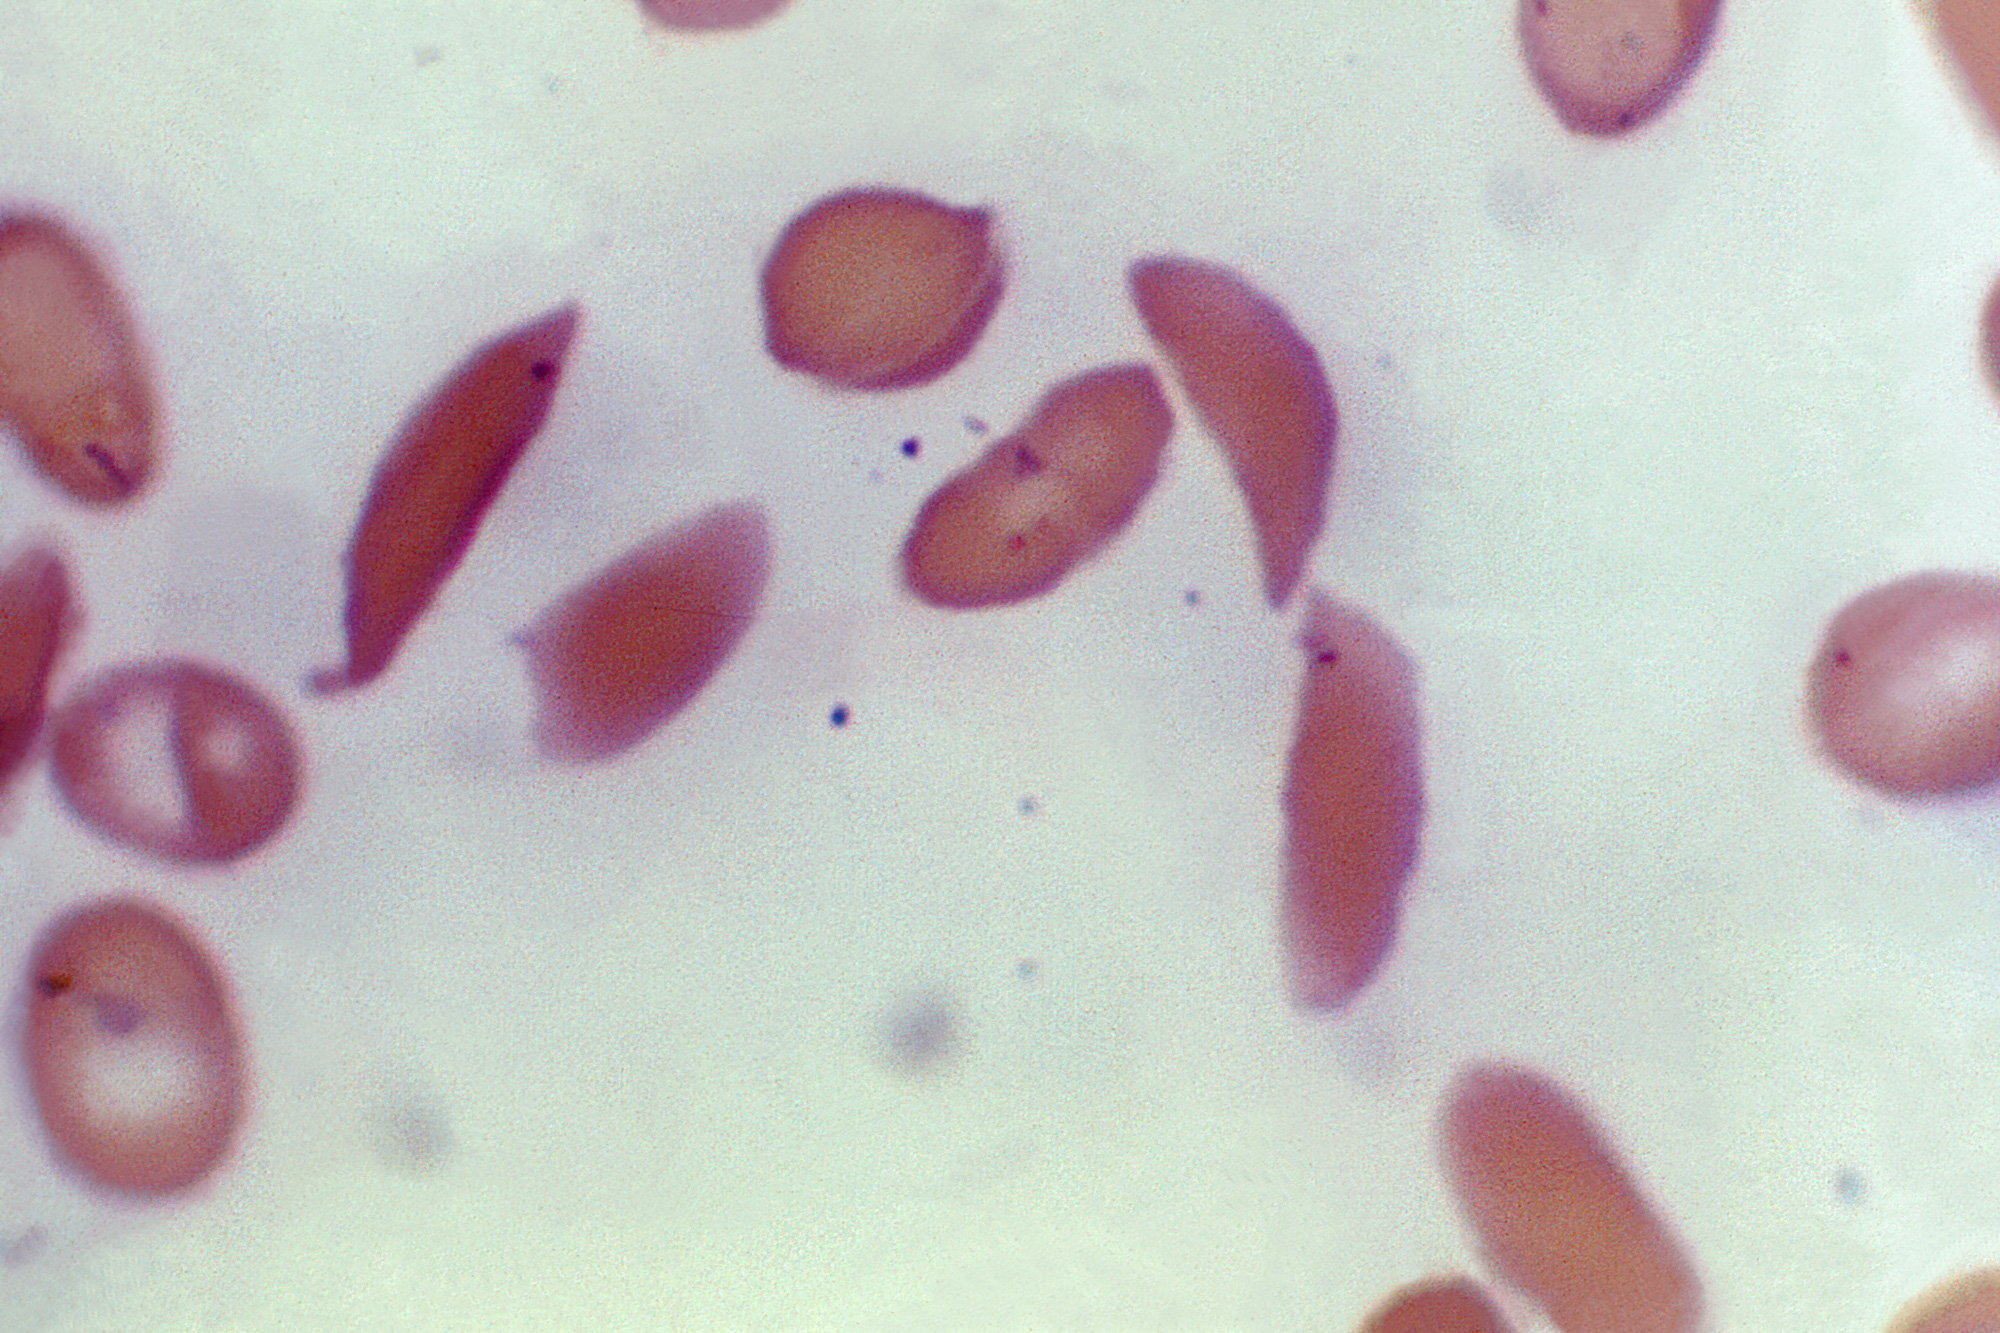 Crescent-shaped red blood cells from a person with sickle cell disease are viewed under a microscope in 1972.